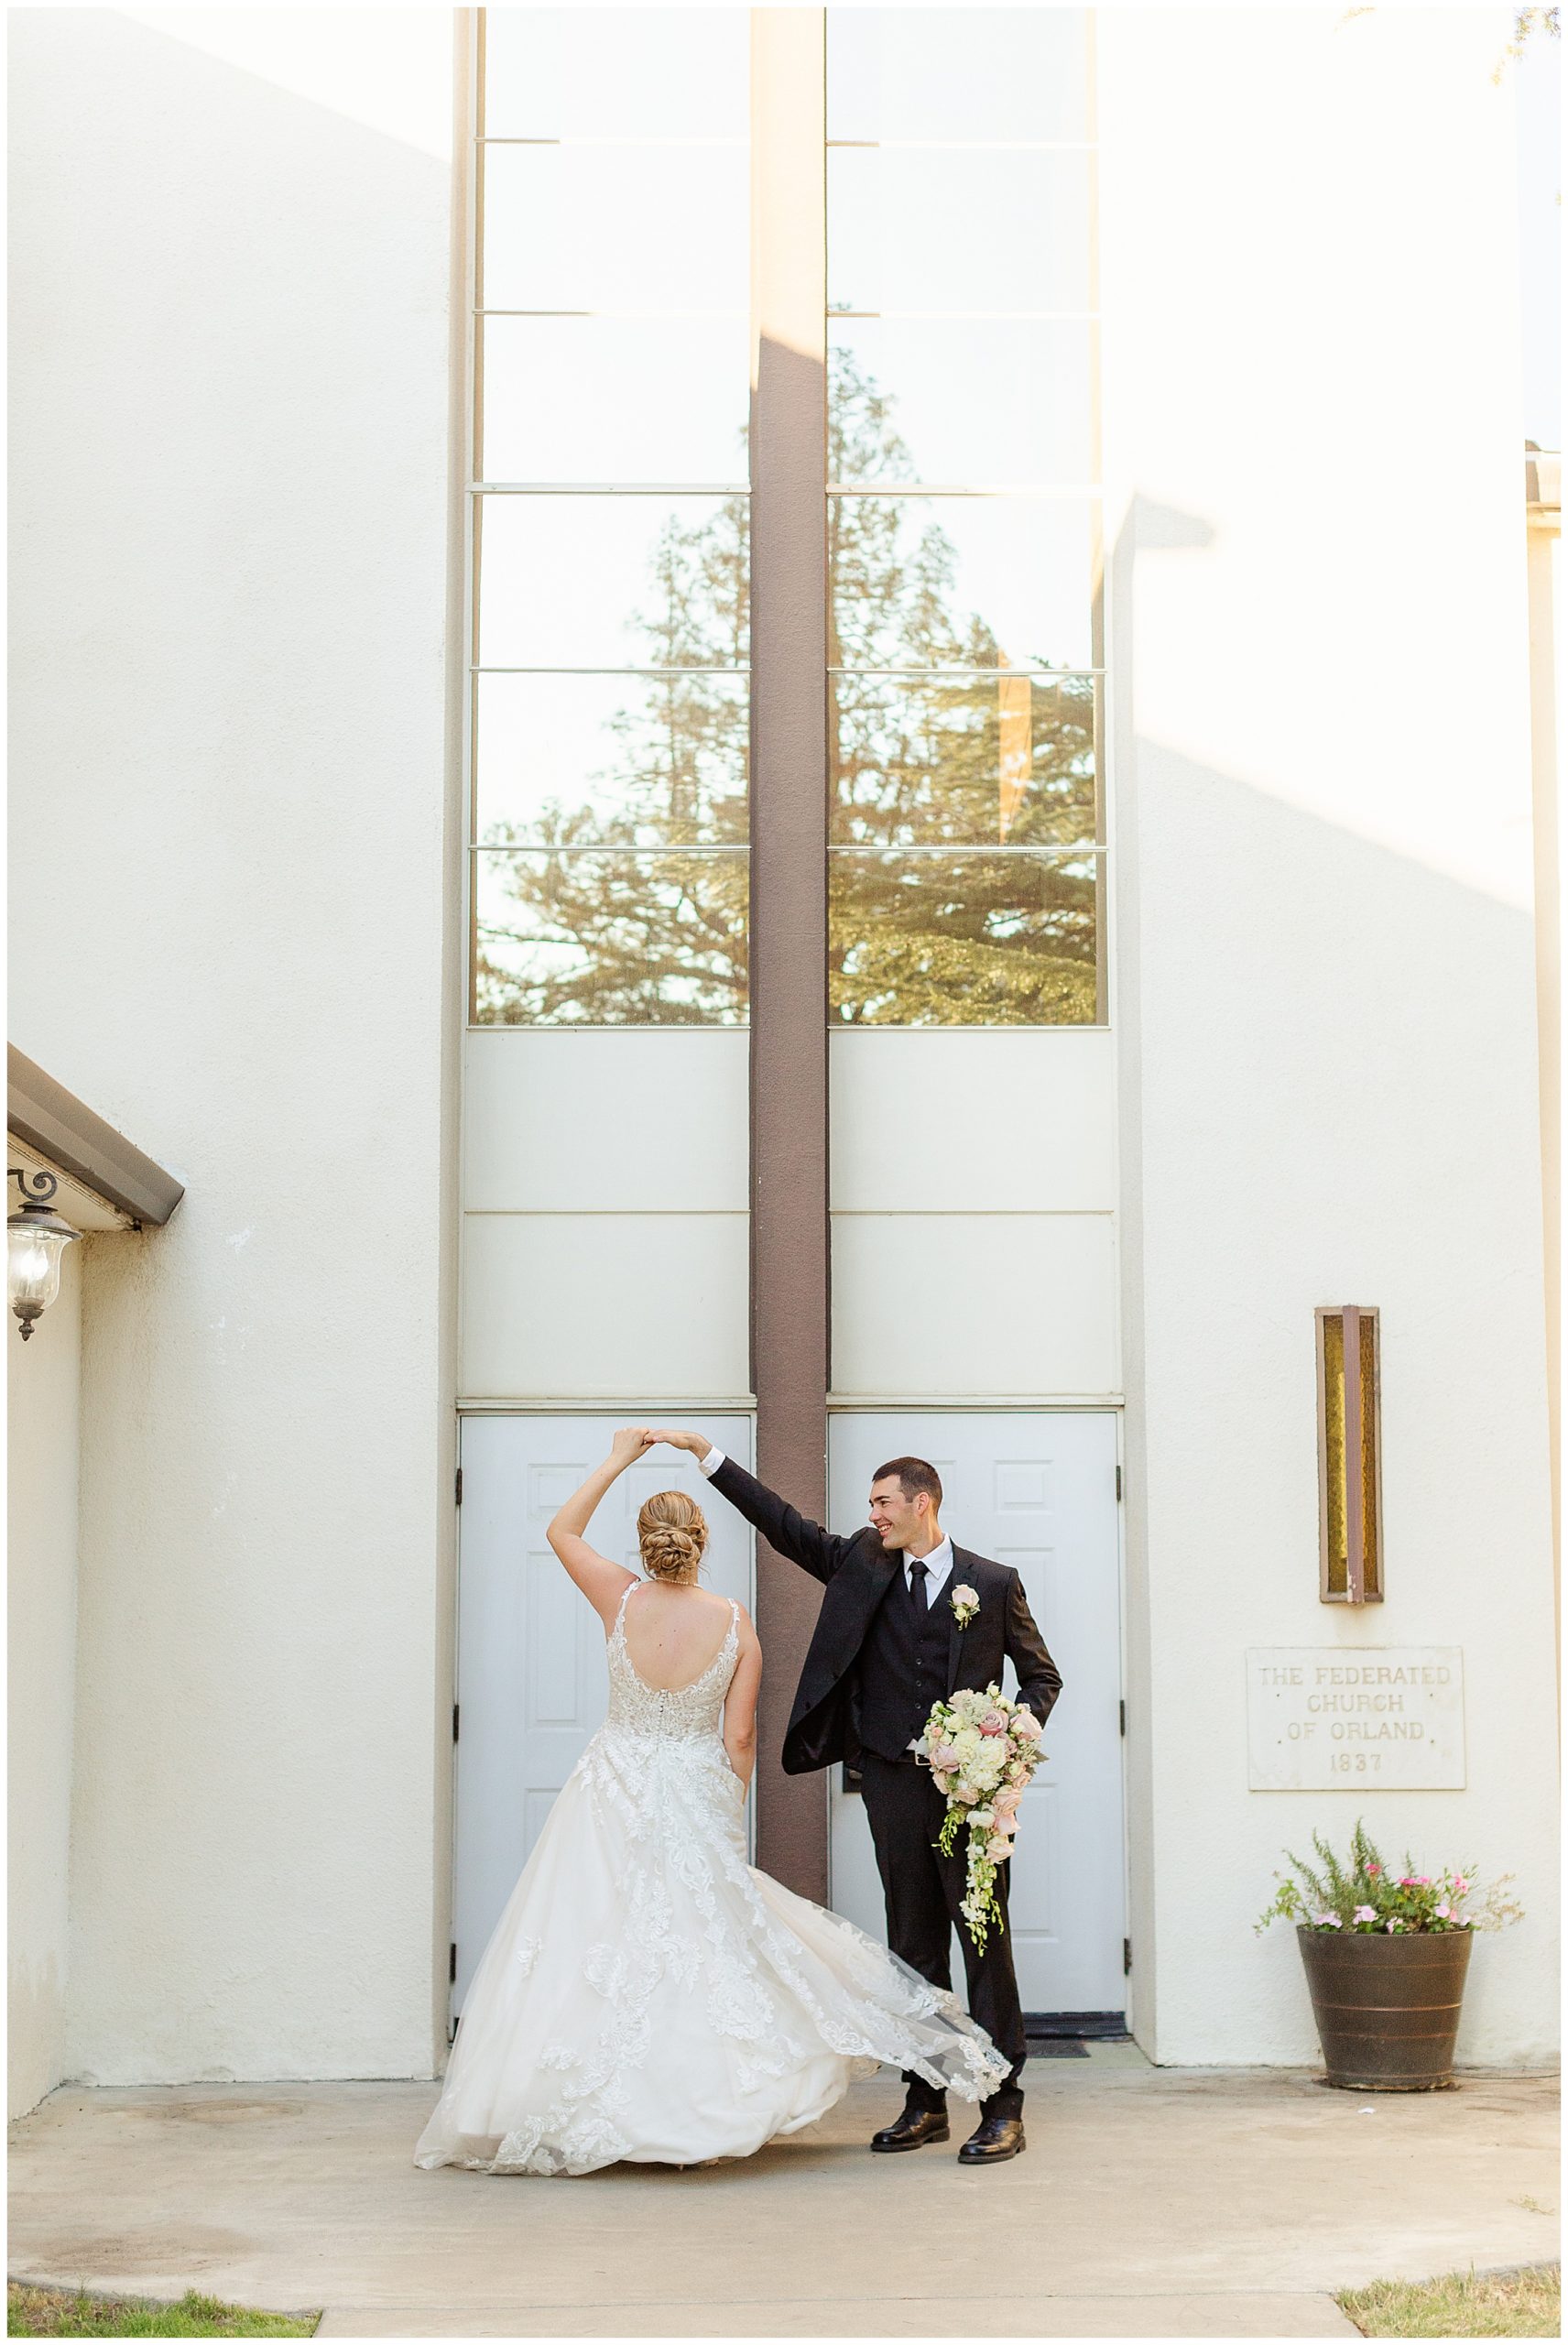 Twirling outside the church doors | Andrea and Jason